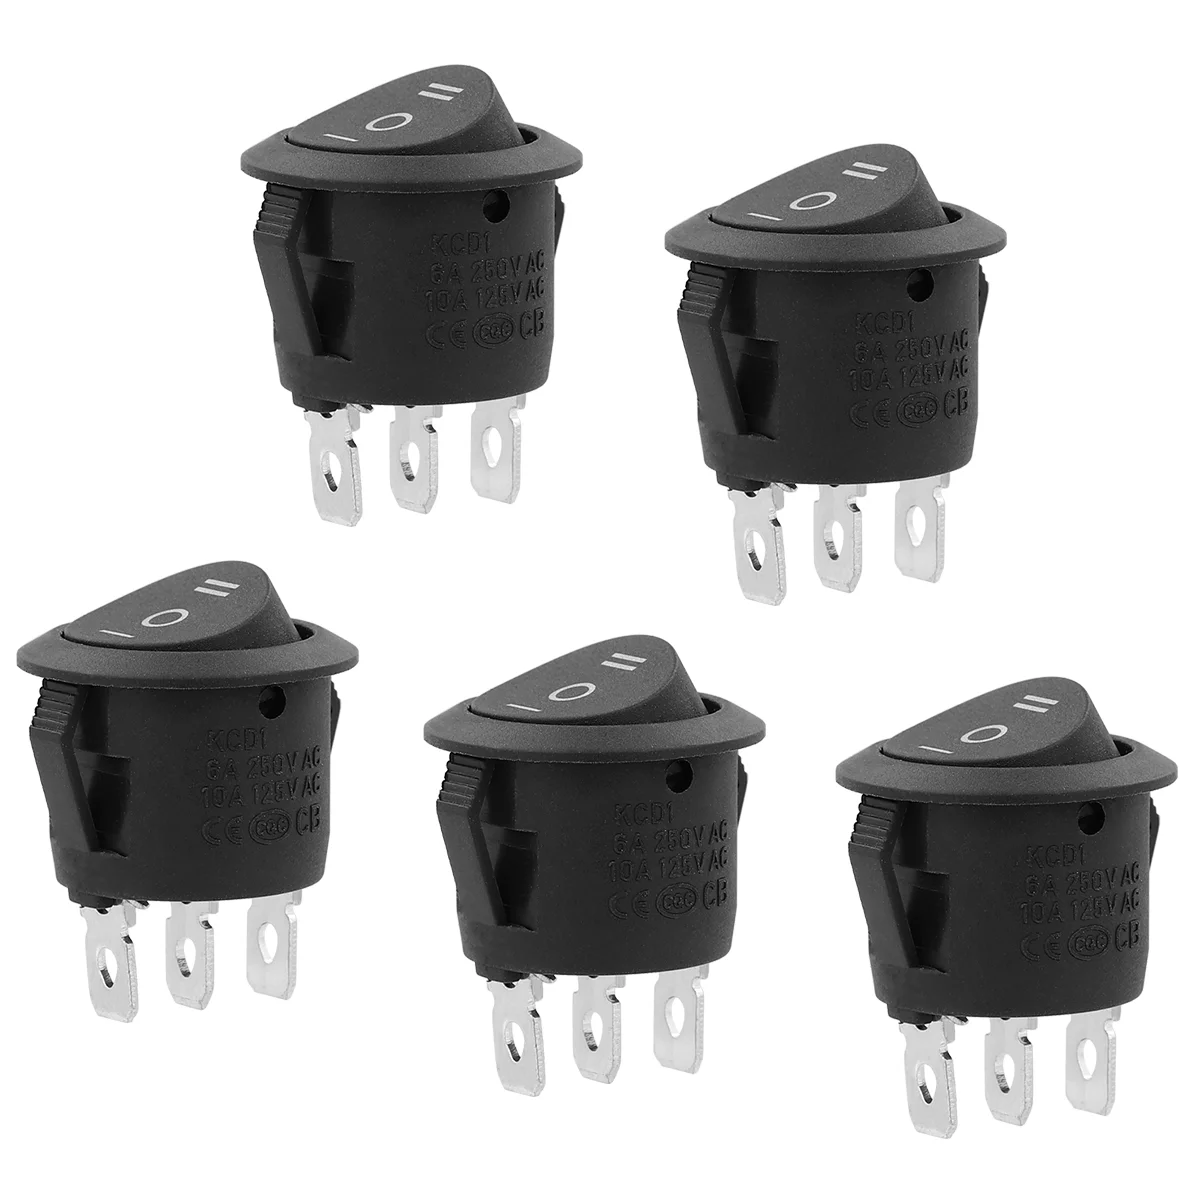 

WINOMO 5 PCS 3 Car Round Rocker Switches 23mm Single Pole Toggle Switch Double Throw Push Buttons (Black)